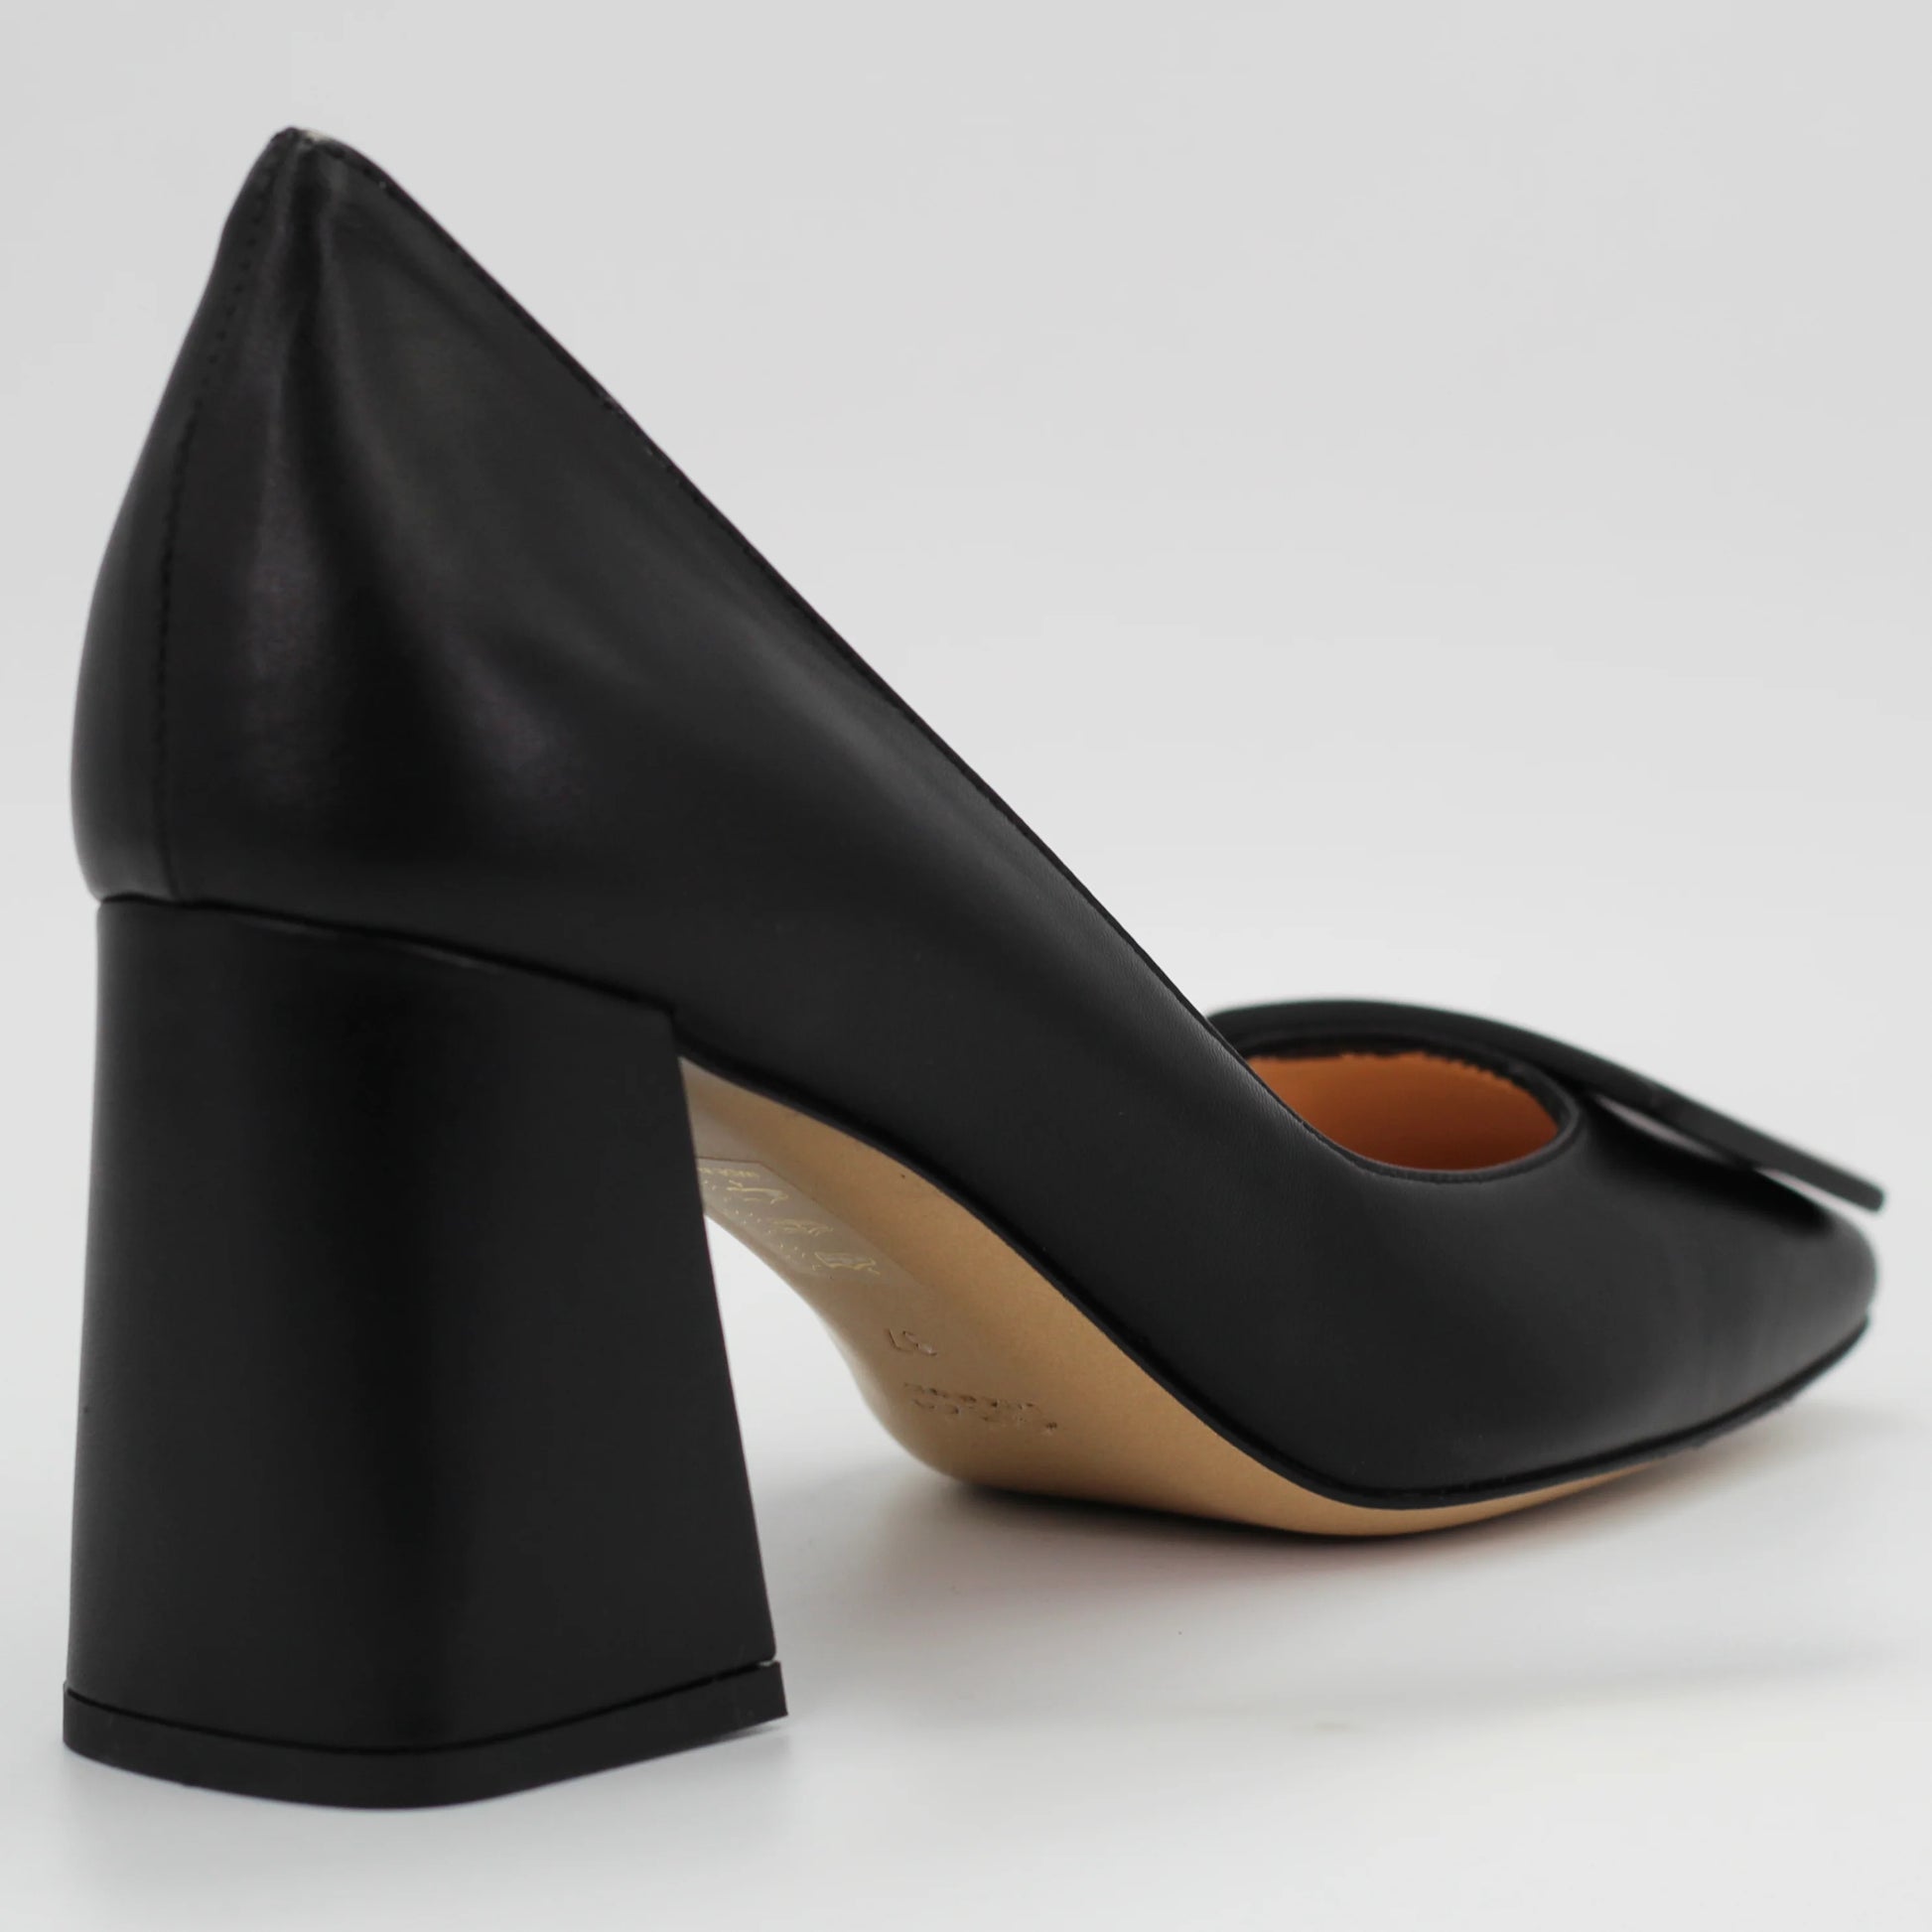 Shop Handmade Italian Leather block heel in black (MP1710) or browse our range of hand-made Italian shoes in leather or suede in-store at Aliverti Cape Town, or shop online. We deliver in South Africa & offer multiple payment plans as well as accept multiple safe & secure payment methods.